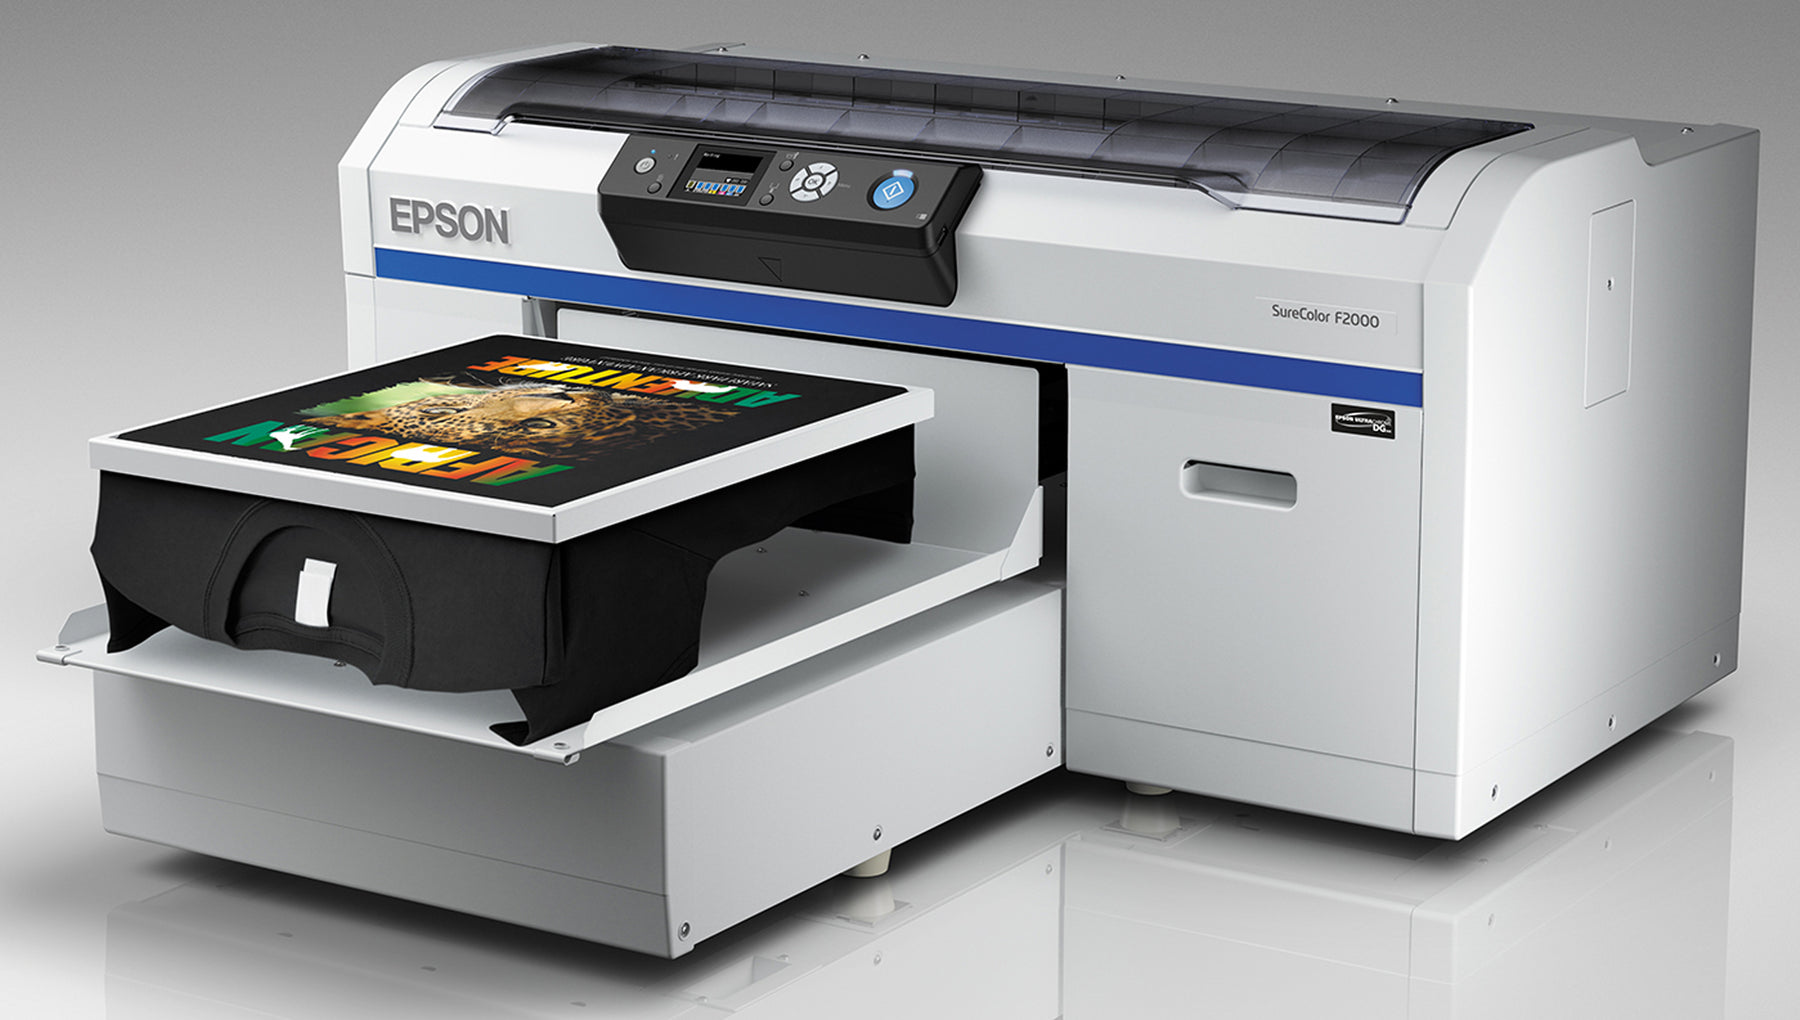 Introducing the Epson SureColor F2000 Series